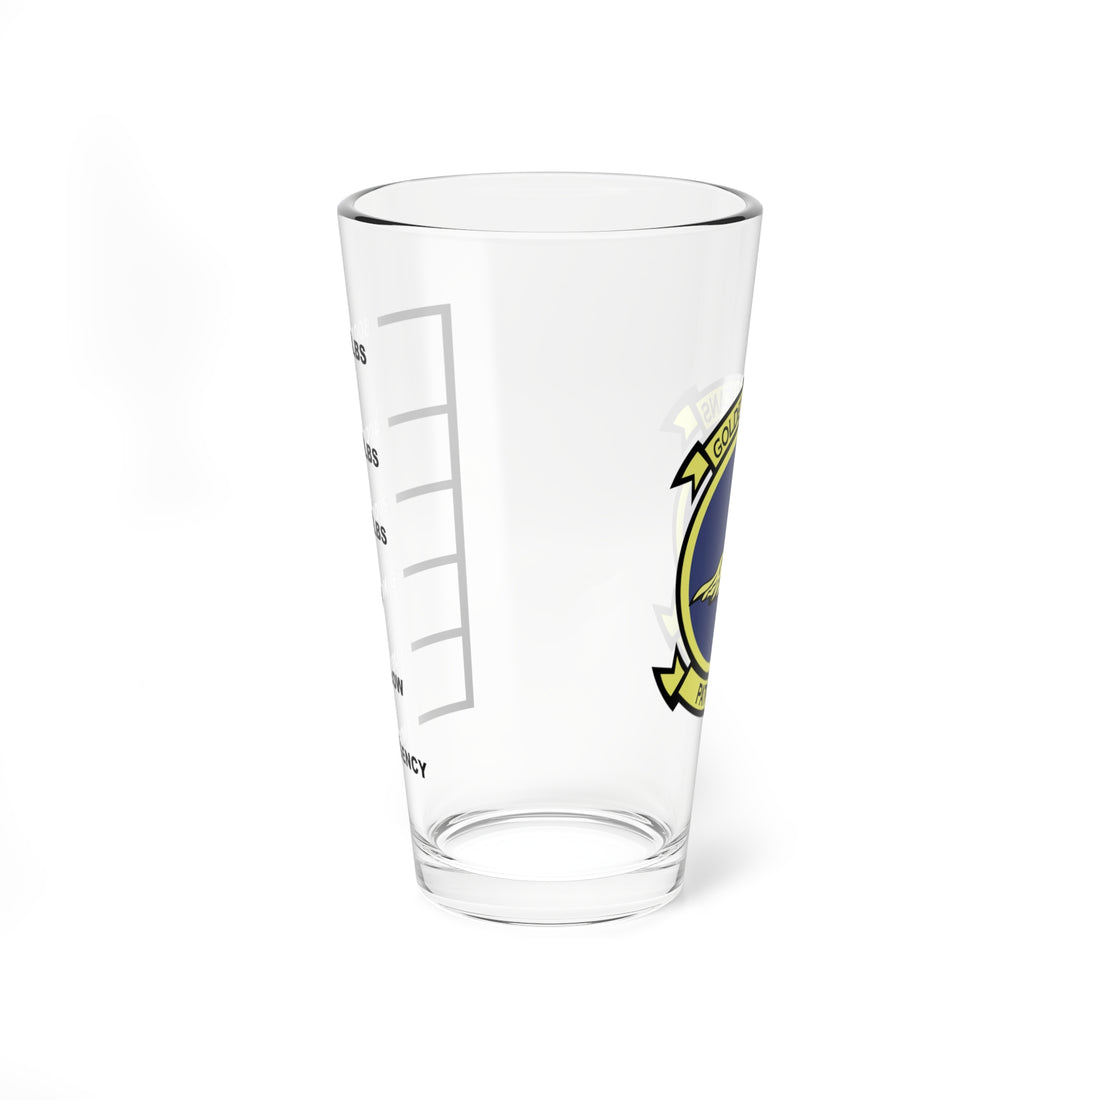 VP-44 "Golden Pelicans" Fuel Low Pint Glass, US Navy Maritime Patrol Squadron Flying the P-3 Orion